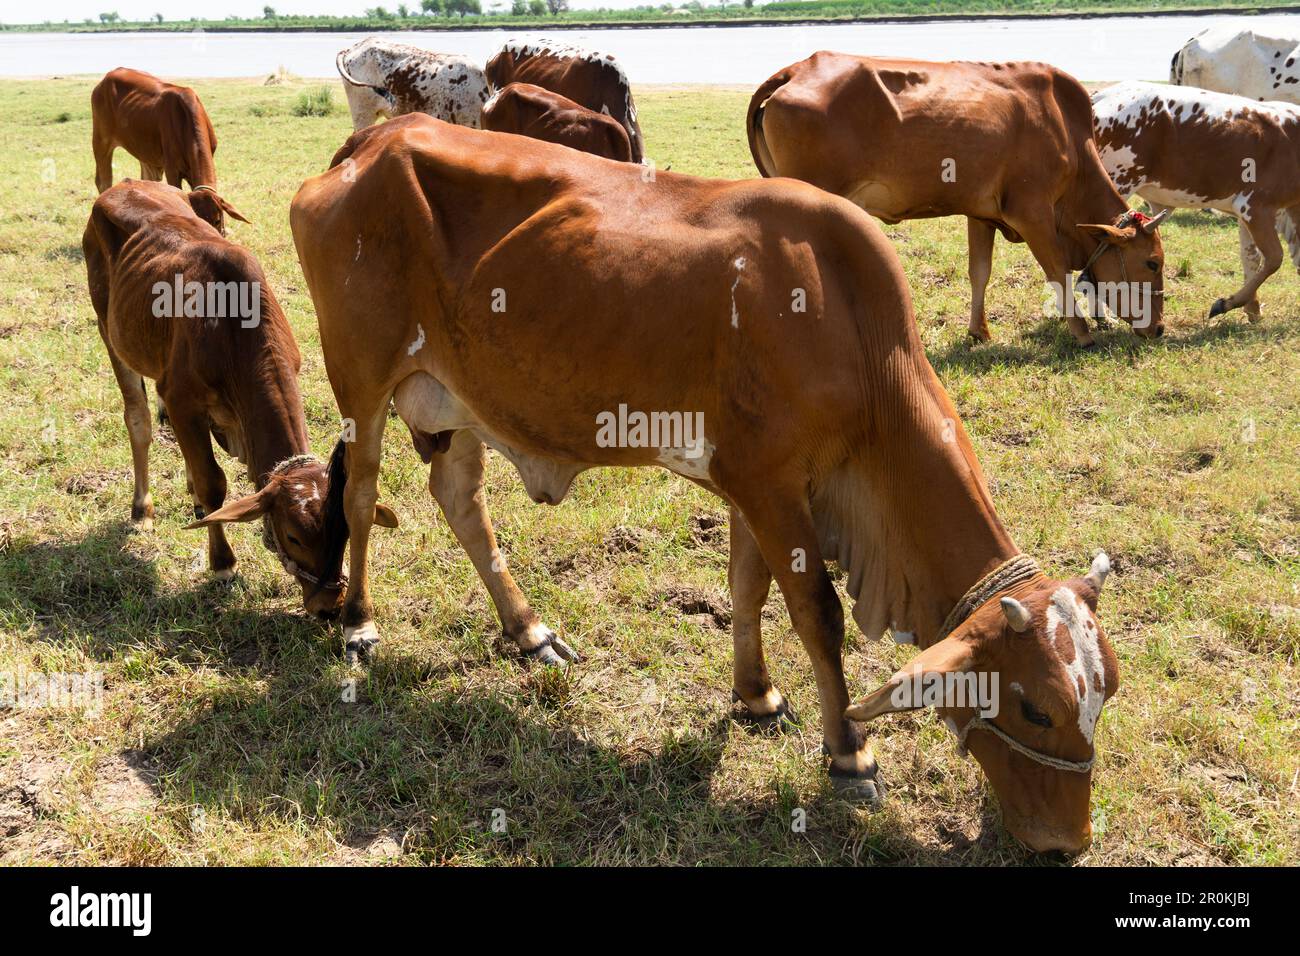 Cows in a grassy field on a bright and sunny day Stock Photo